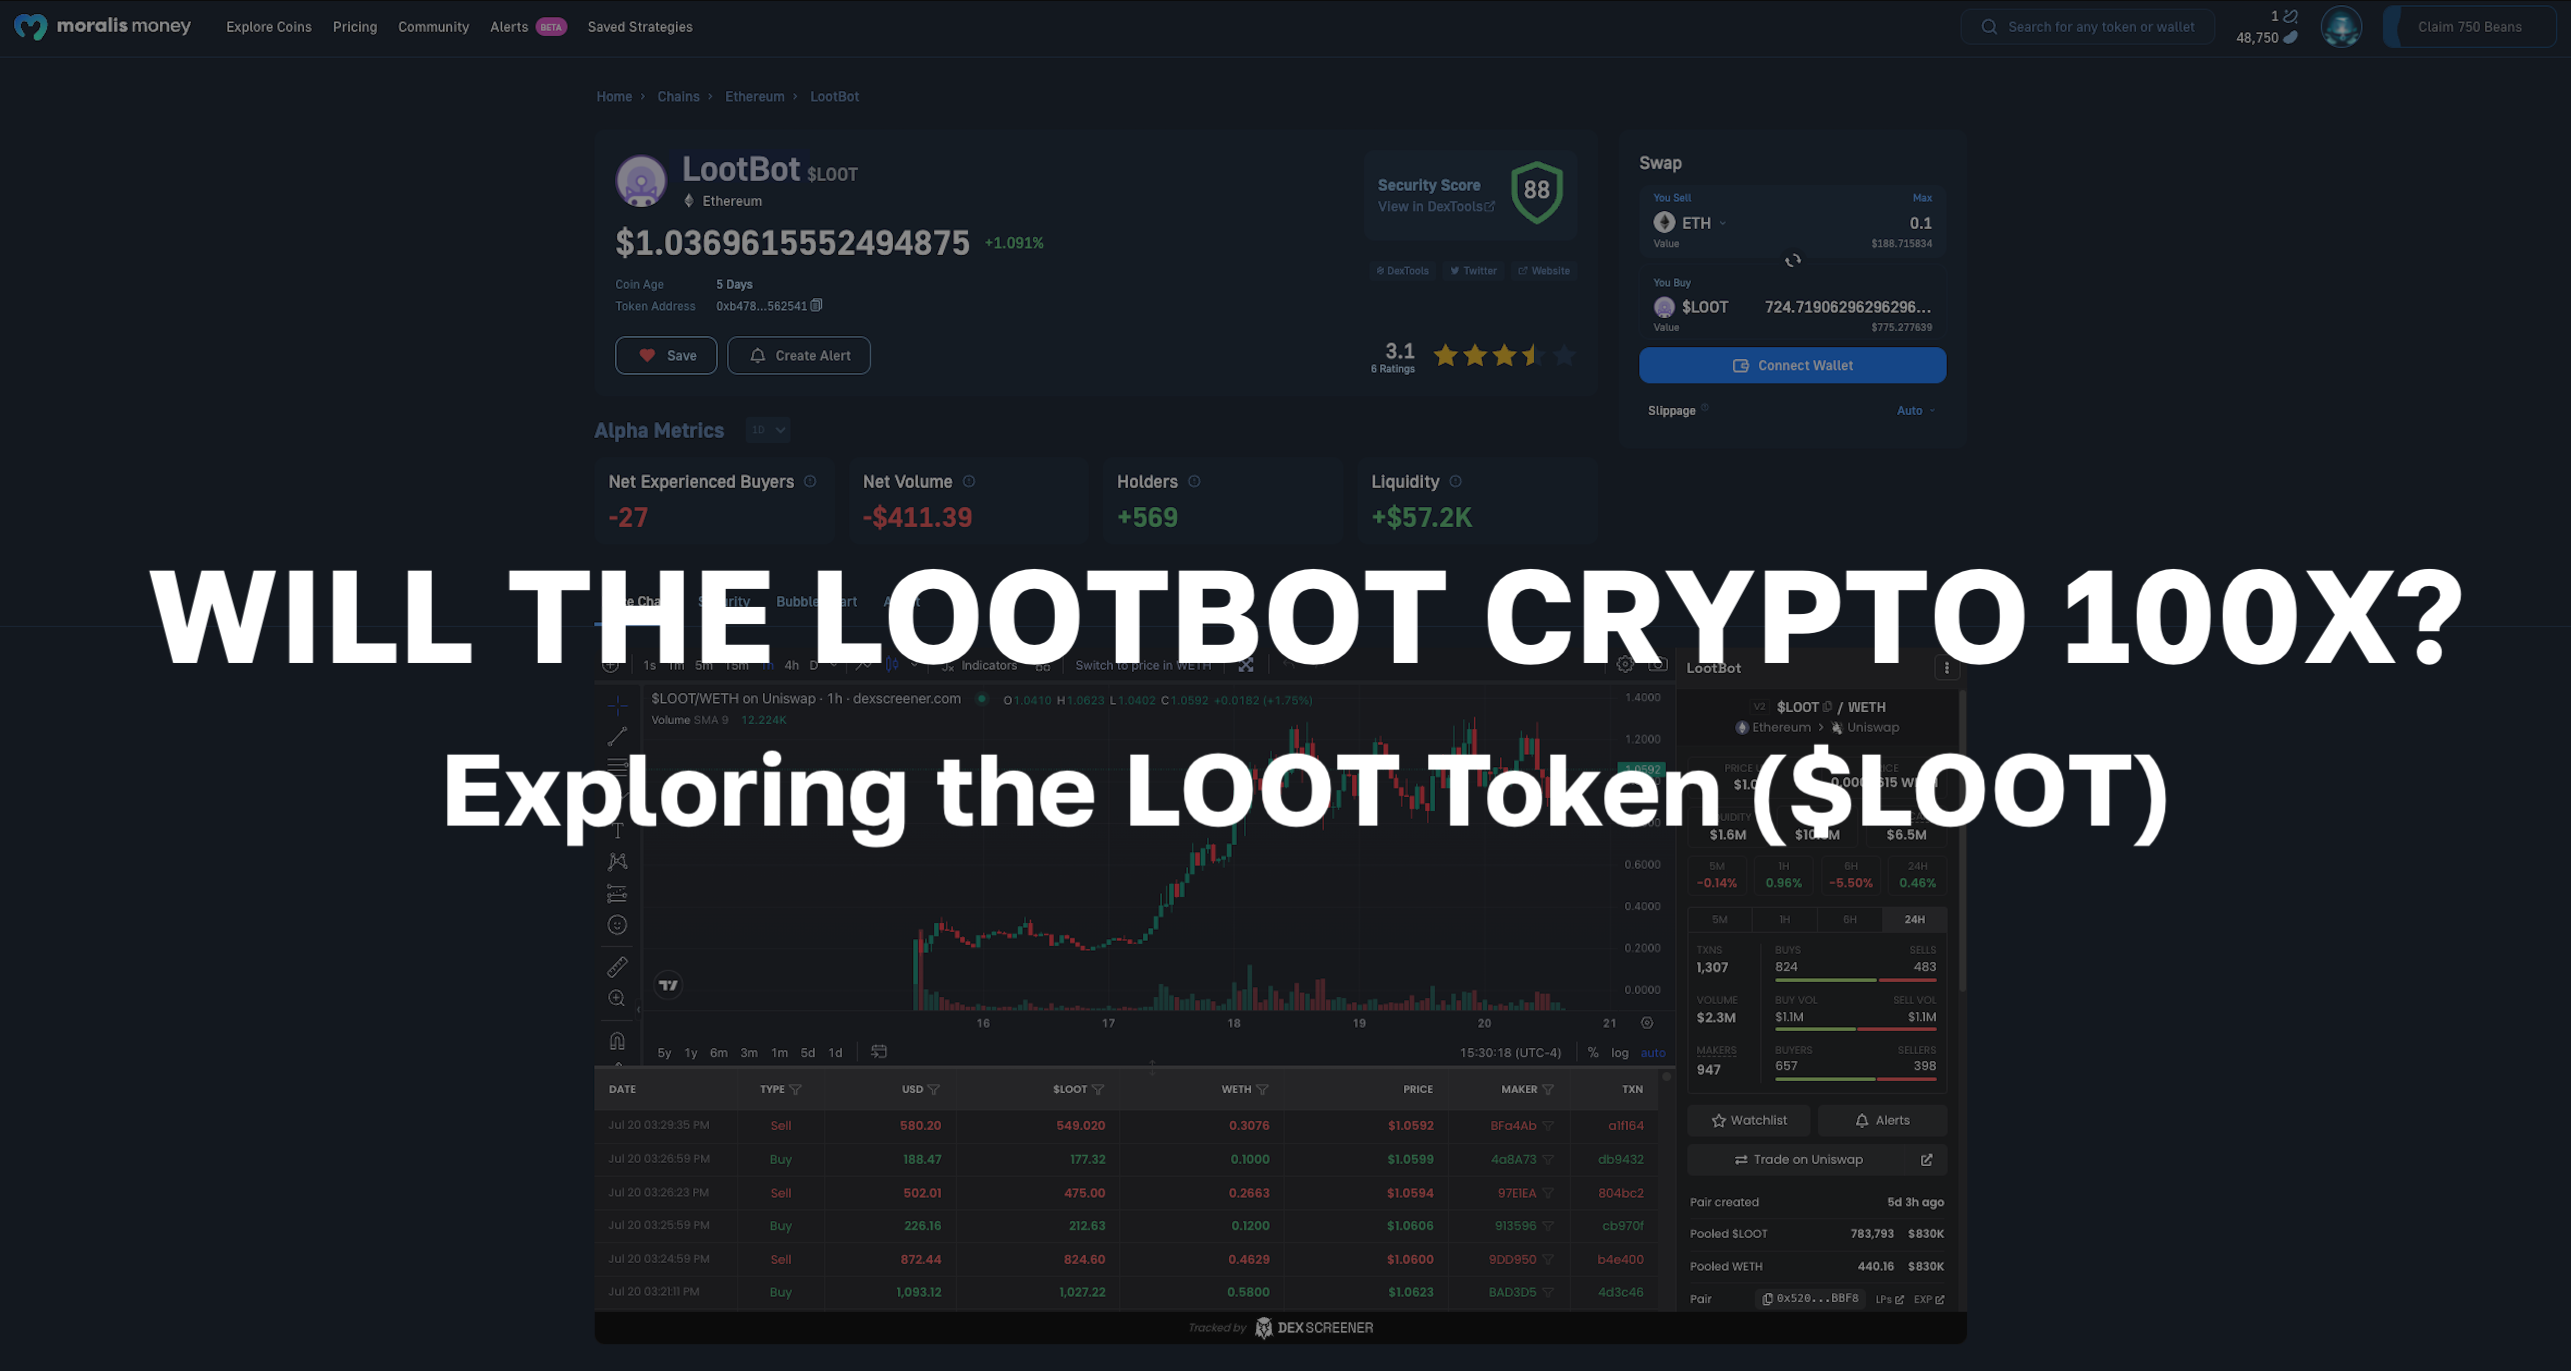 Will the LootBot Crypto 100x? Exploring the LOOT Token